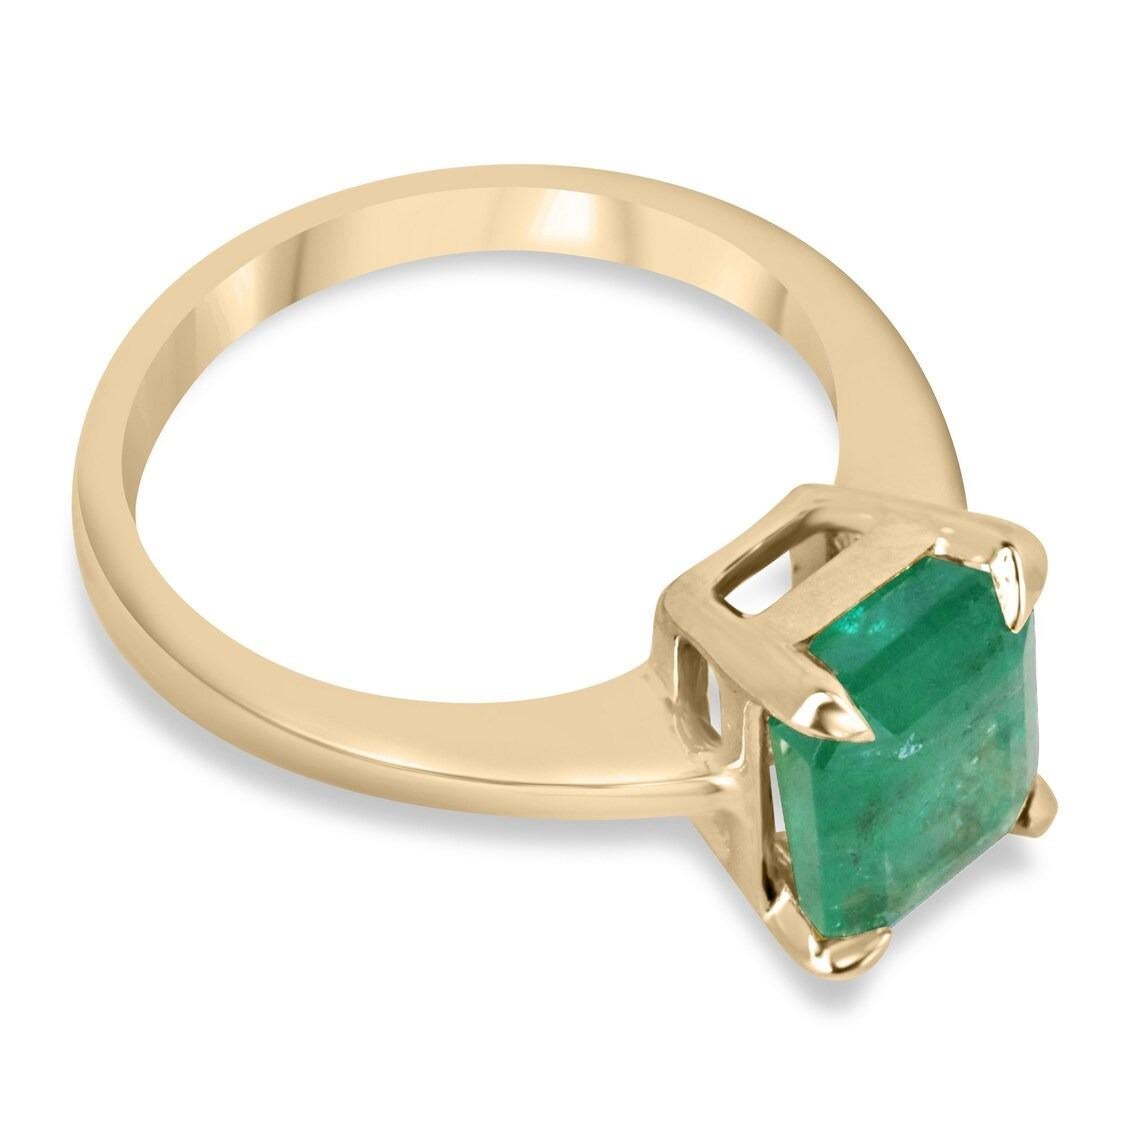 This stunning engagement ring features a natural emerald cut emerald with a weight of 2.66 carats set in a claw four-prong design. The emerald's rich green color adds a touch of elegance and sophistication to the 14K gold band. This solitaire